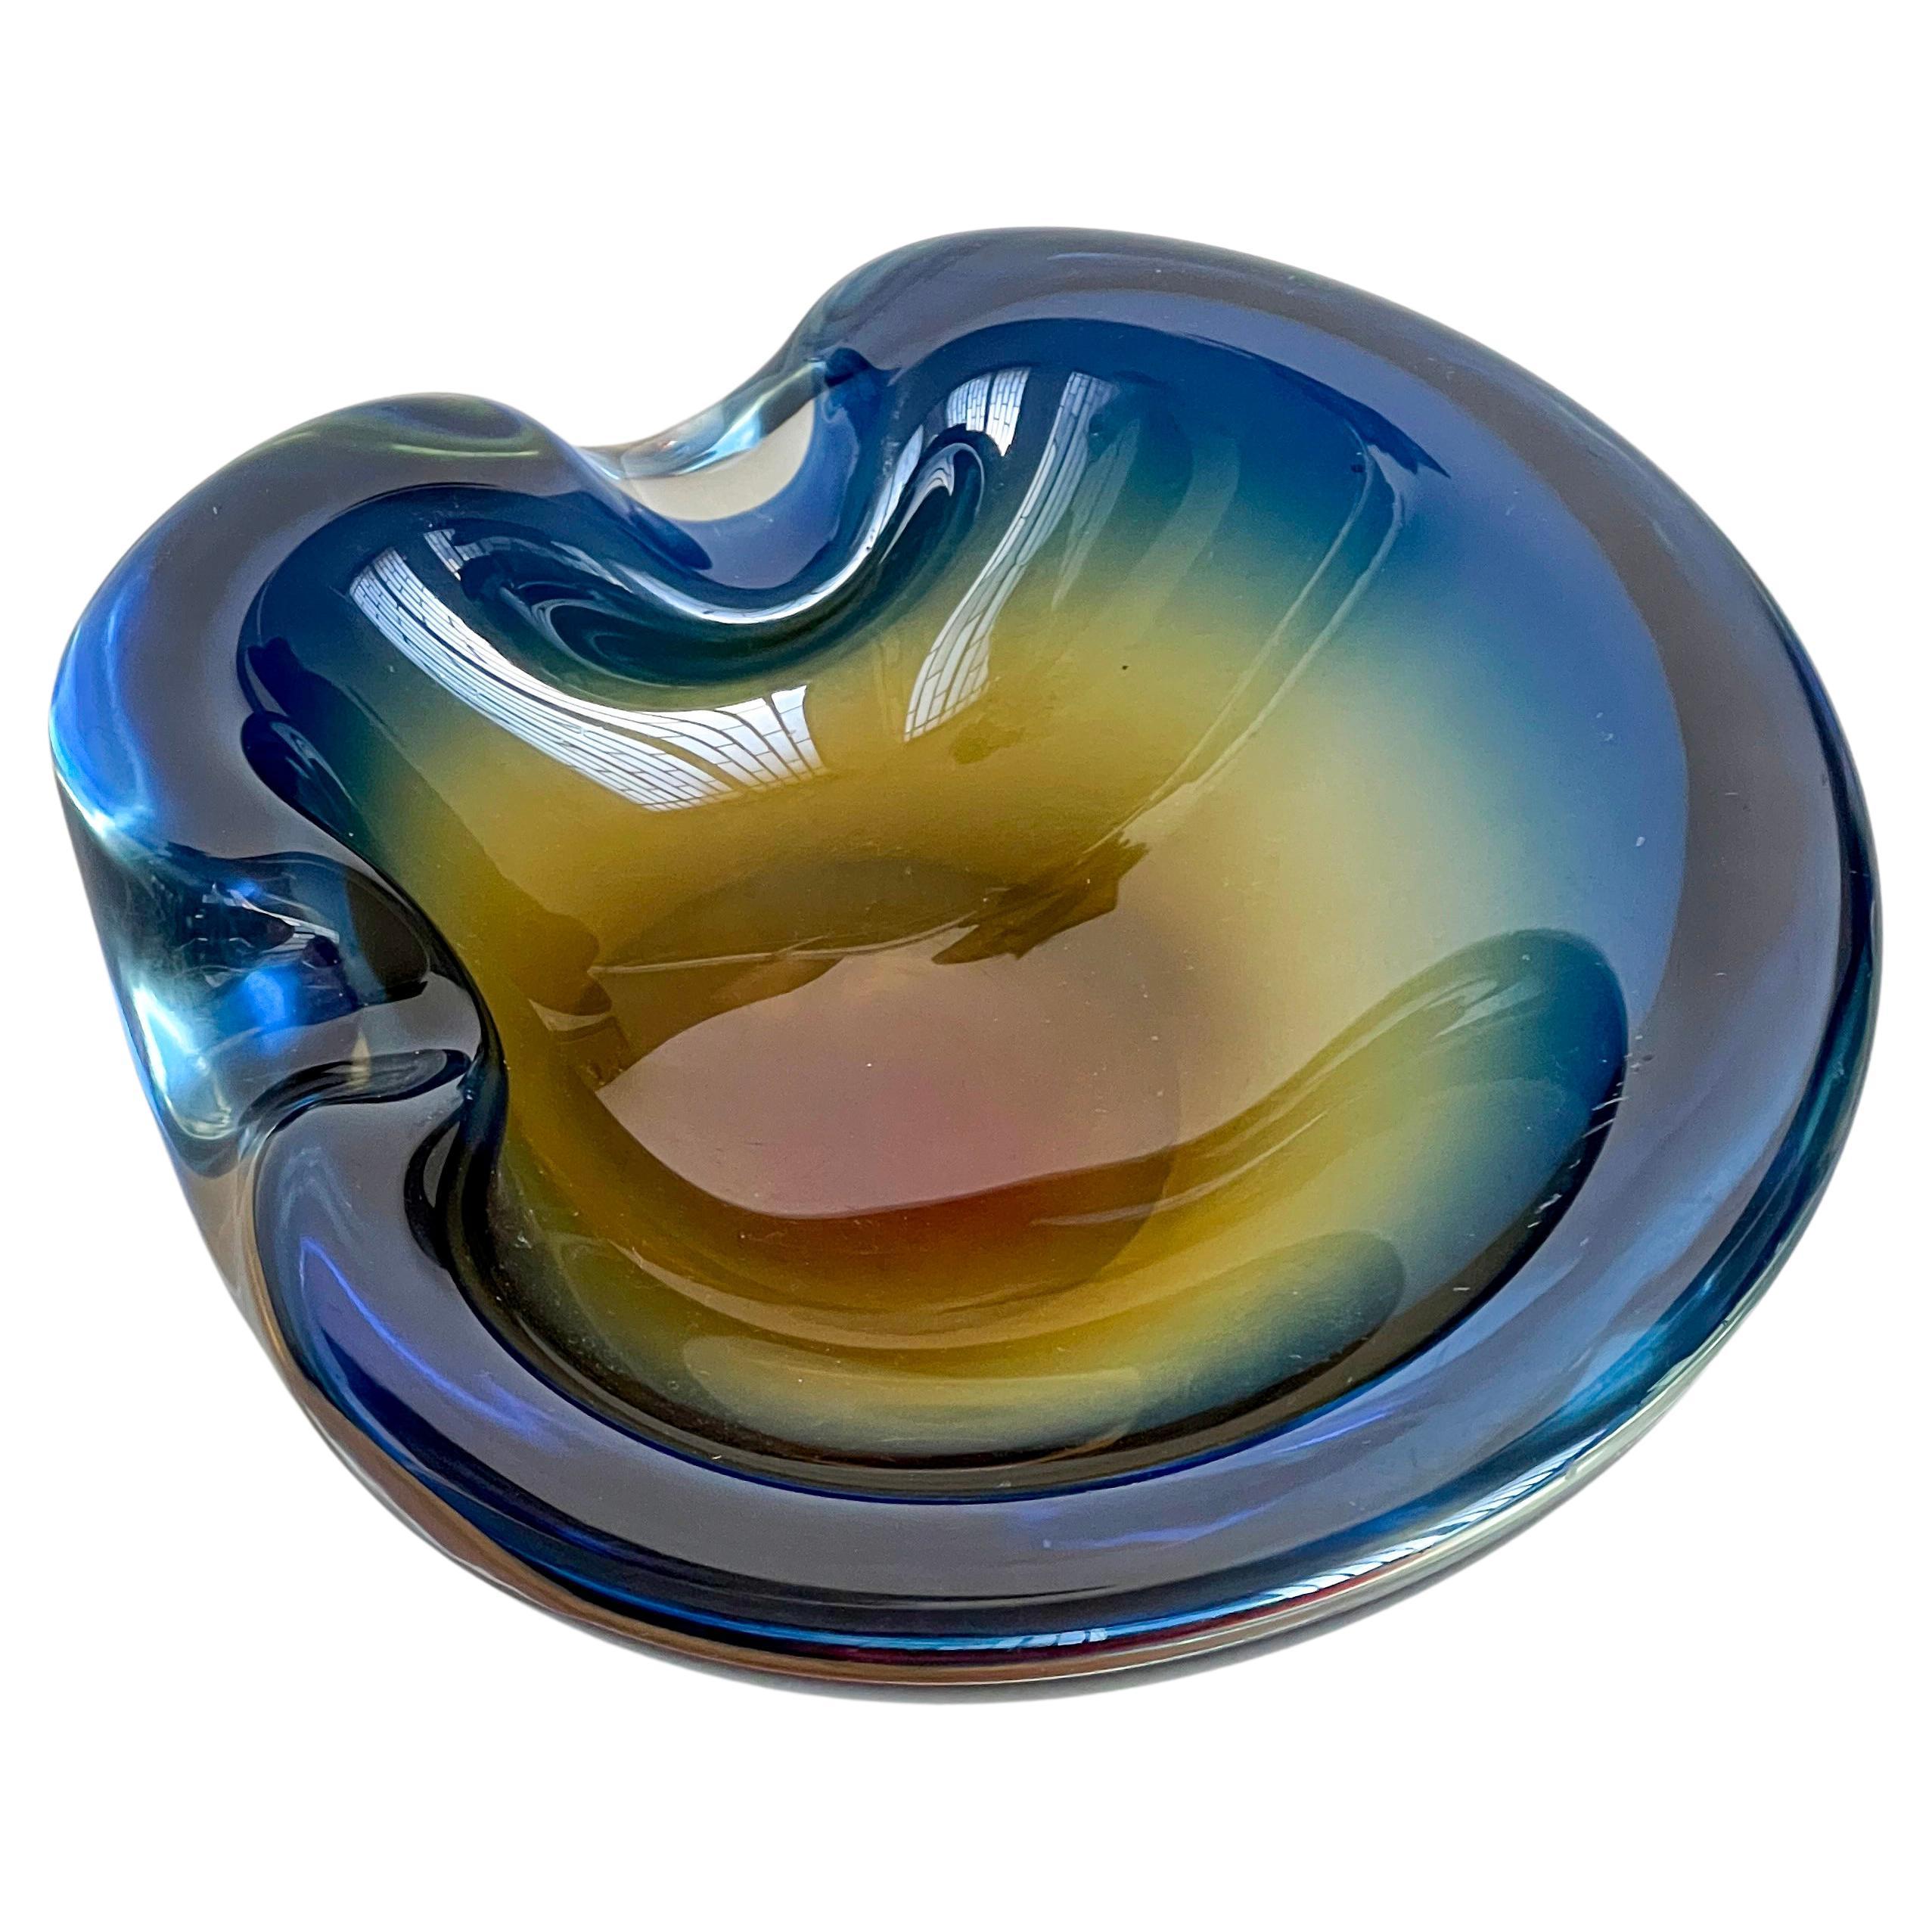 Vintage Big and Massive Sommerso Murano Glass Bowl, Blue and Yellow, Flavio Poli For Sale